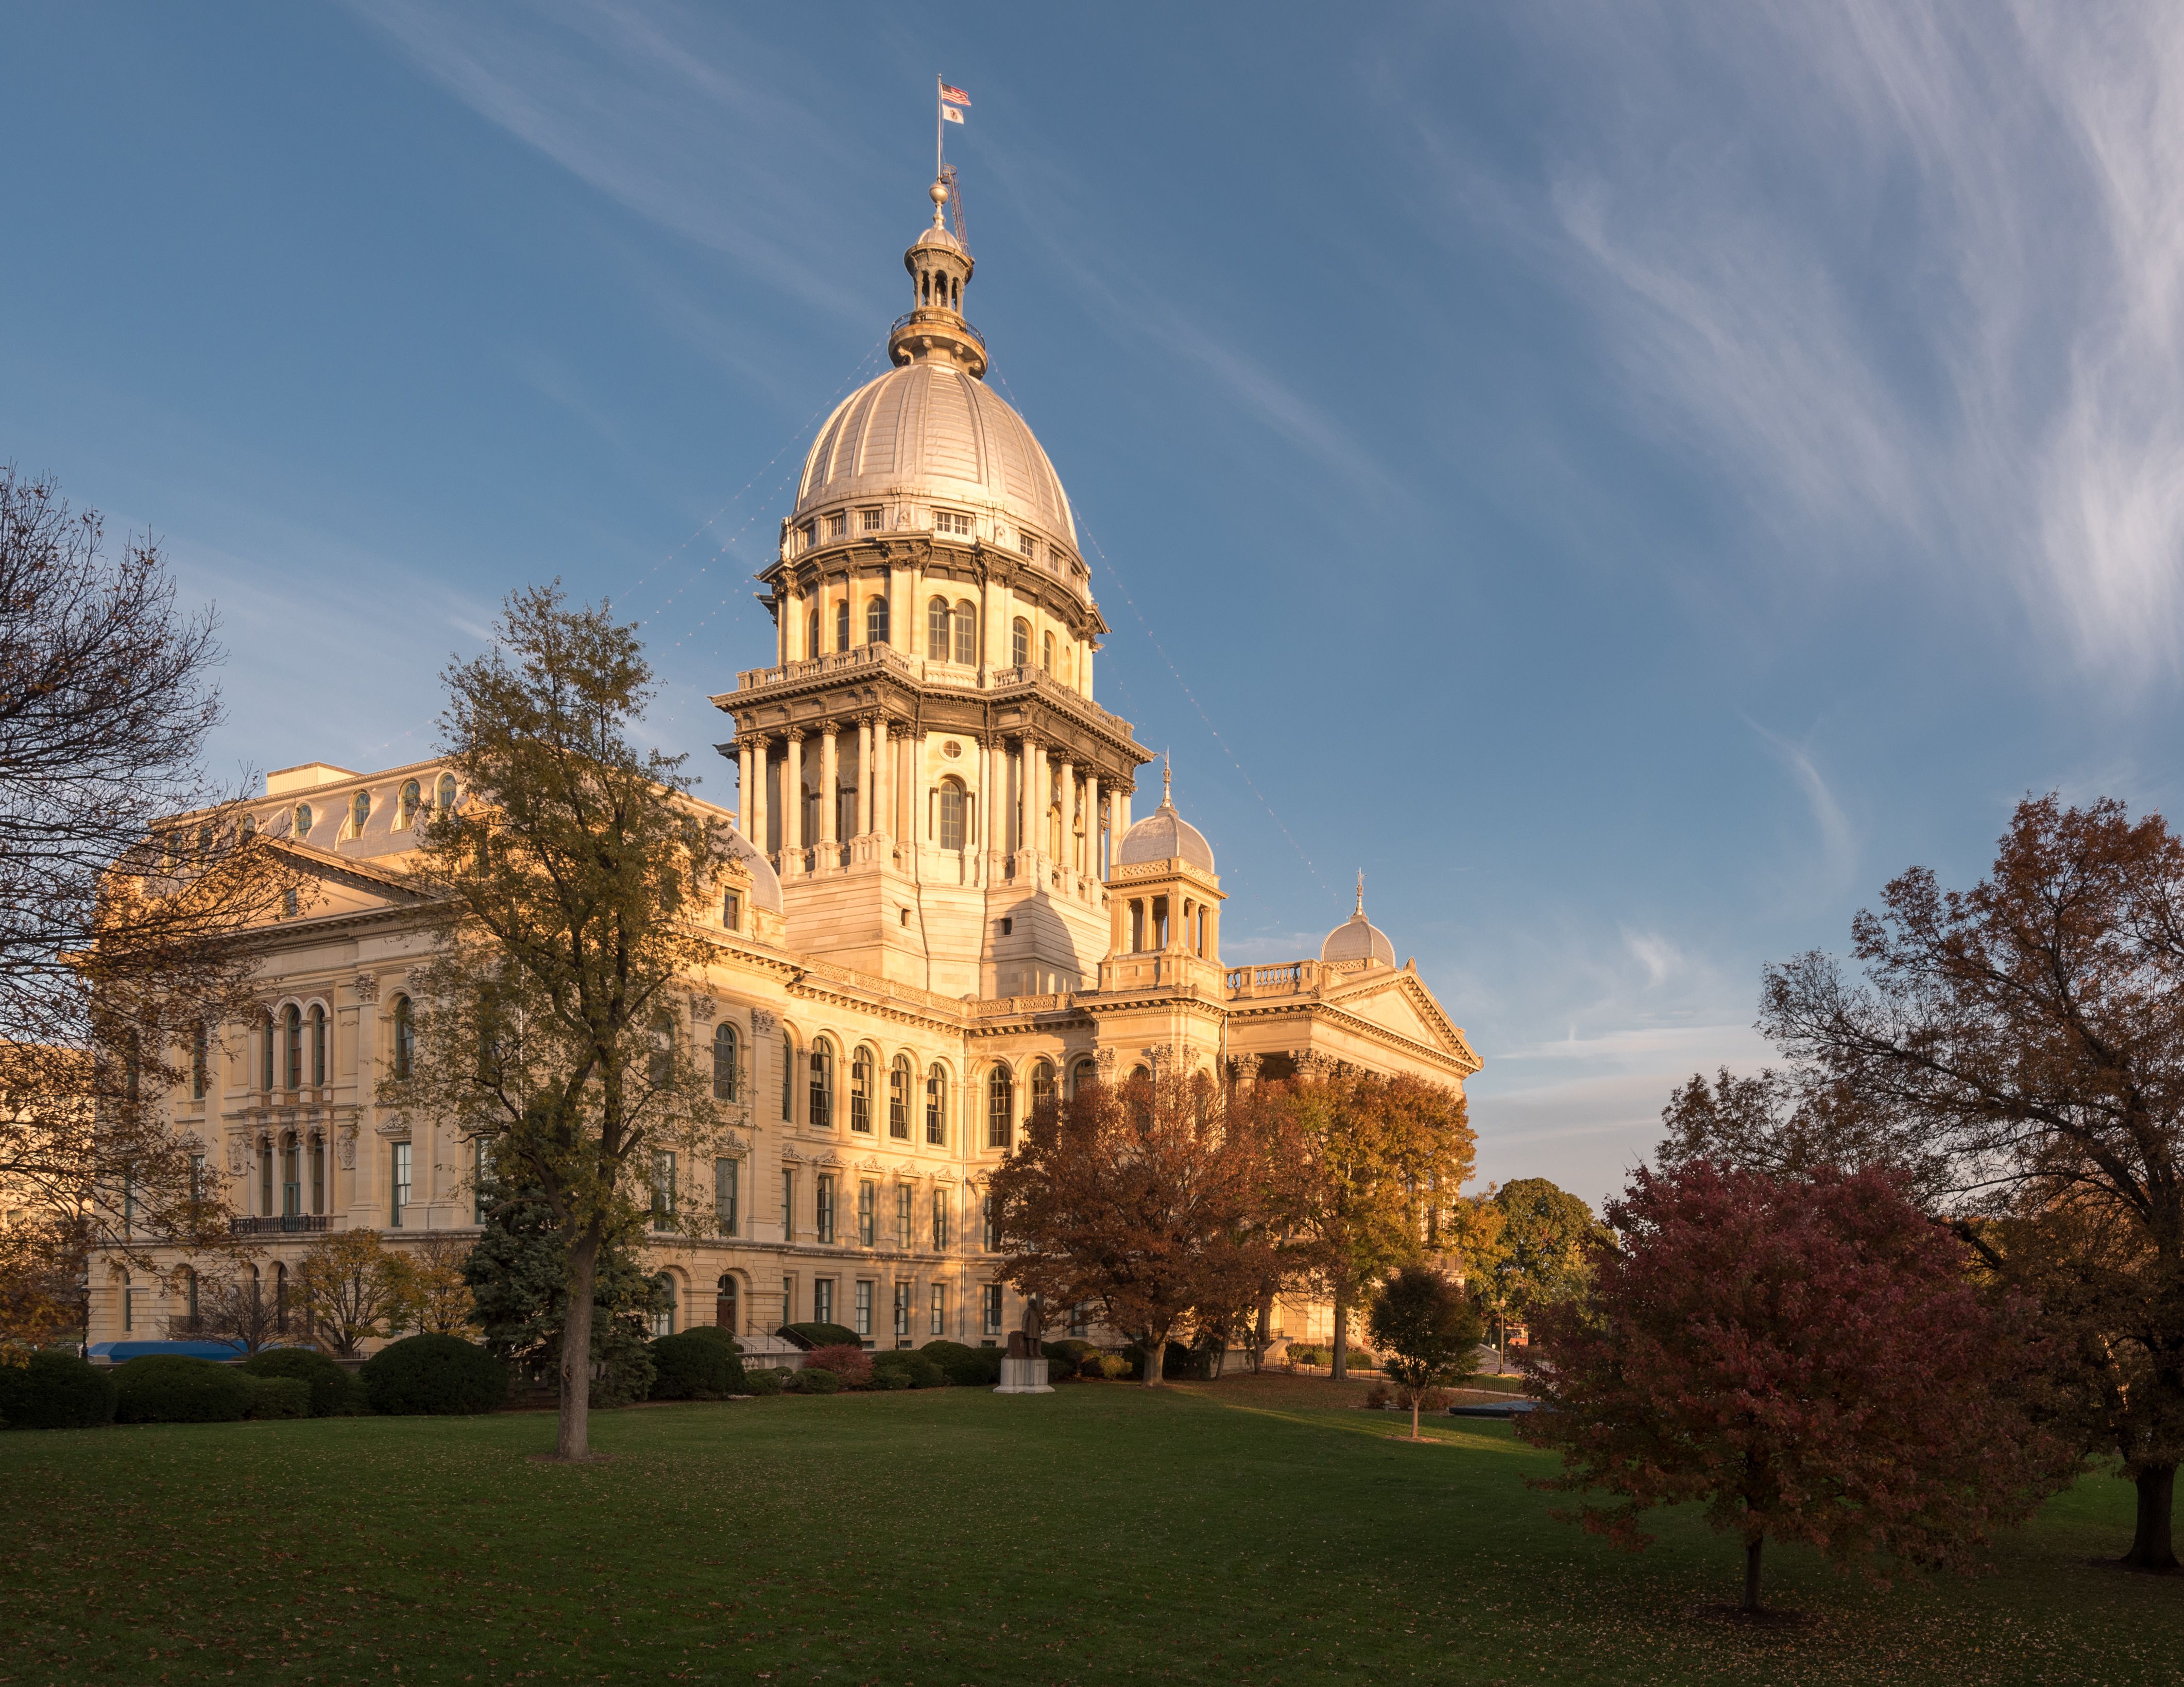 Illinois State Capitol in Springfield. Image by Randall Runtsch / Shutterstock. United States, undated.